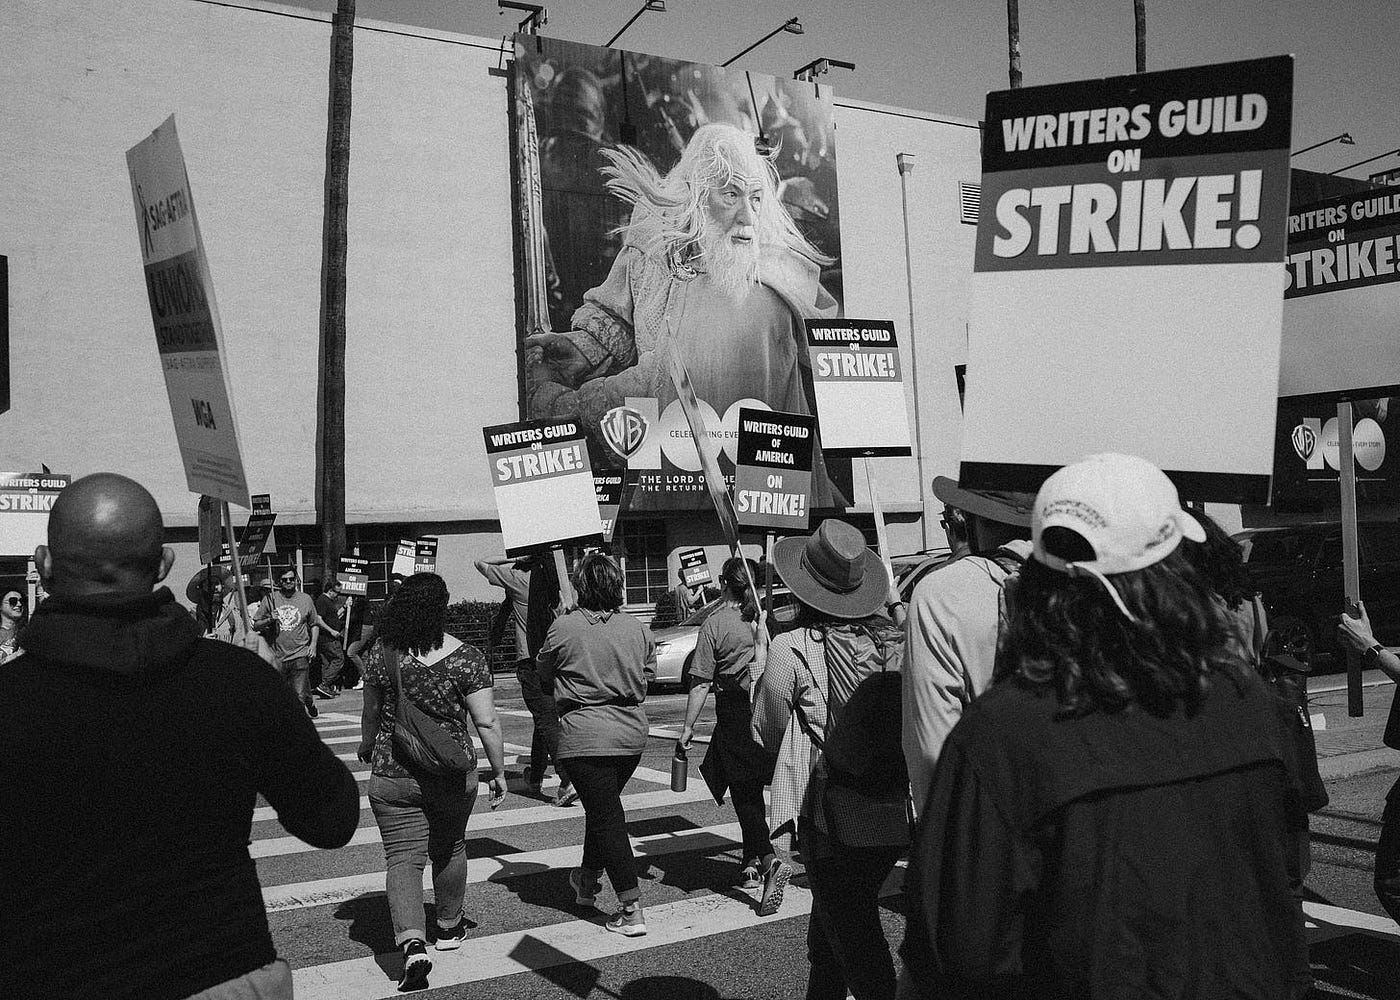 Striking writers and actors, carrying picket signs, cross the street outside Warner Bros. main studio, a giant image of Gandalf hovering over them.